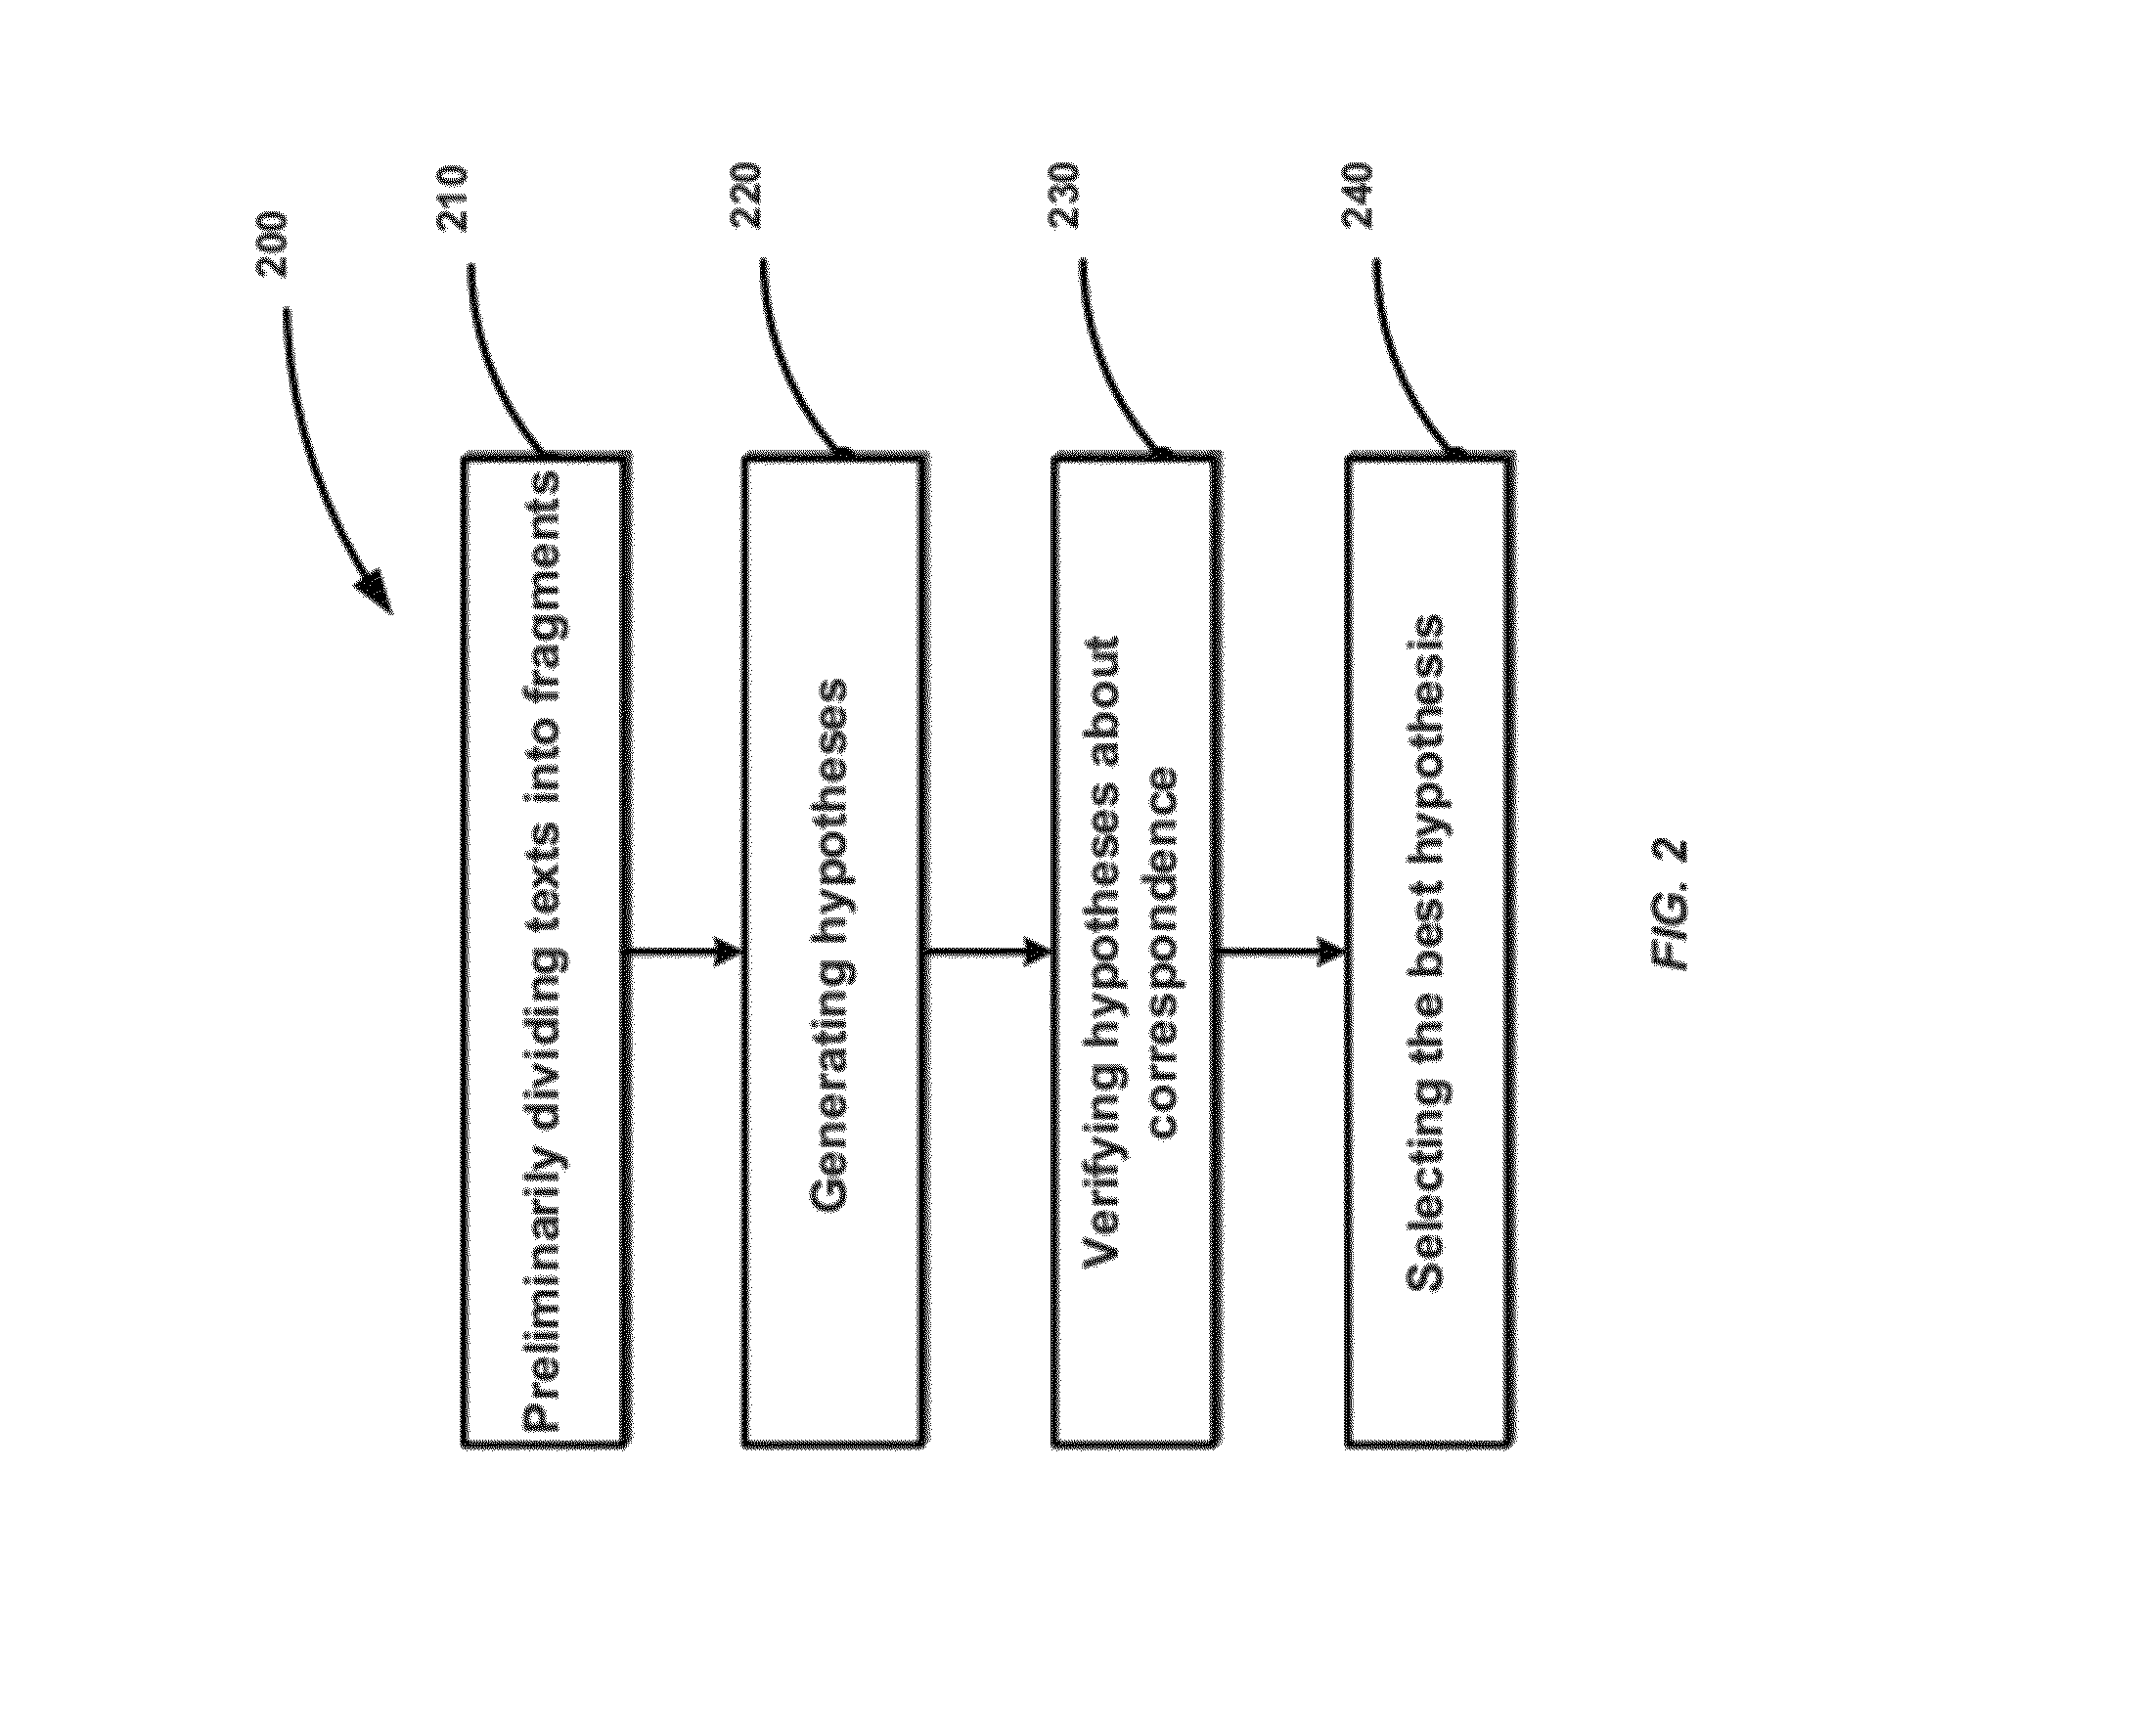 Methods and systems for alignment of parallel text corpora